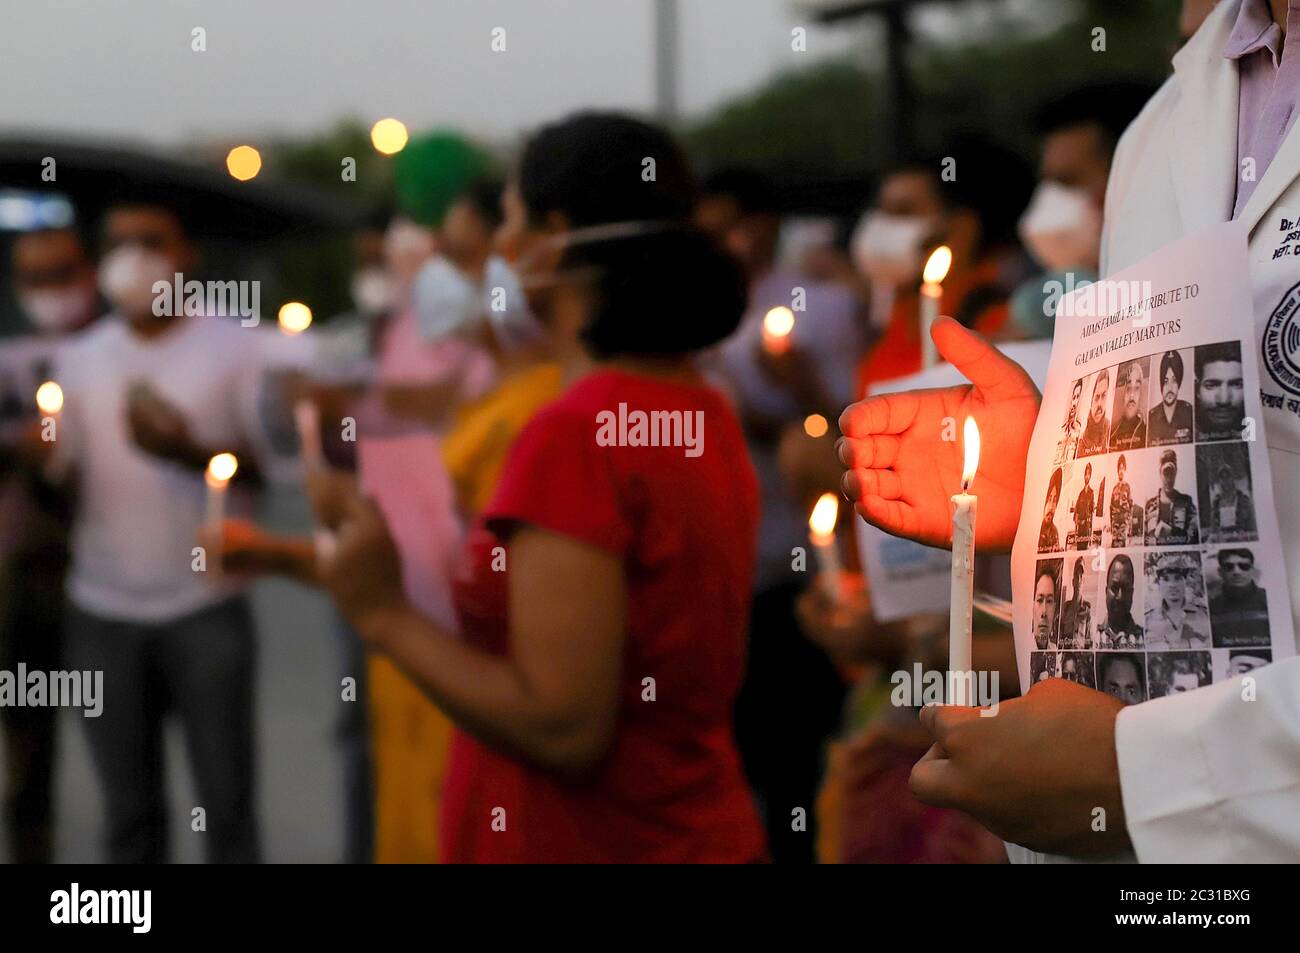 Doctors of All India Institute of Medical Science (AIIMS) hold flamed candles as they pay a tribute to the soldiers who lost their lives following recent clashes between India and China during an anti-China demonstration outside AIIMS hospital in New Delhi. According to Indian media reports, twenty Indian Army personnel, including a colonel were killed during the clashes with Chinese troops in the eastern Ladakh region. Stock Photo